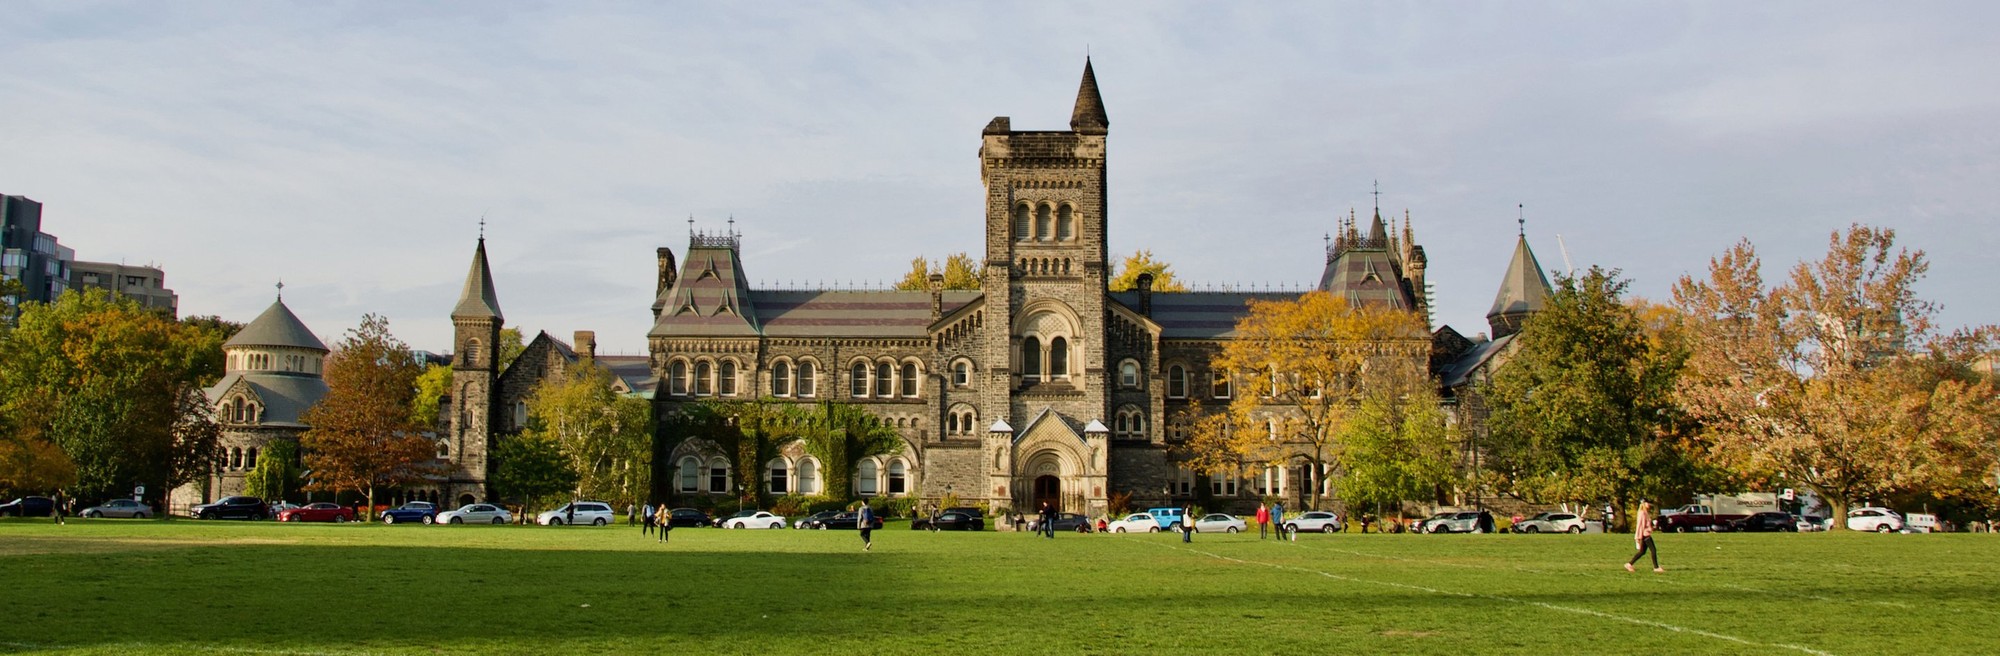 Quad and campus on a sunny day at the University of Toronto